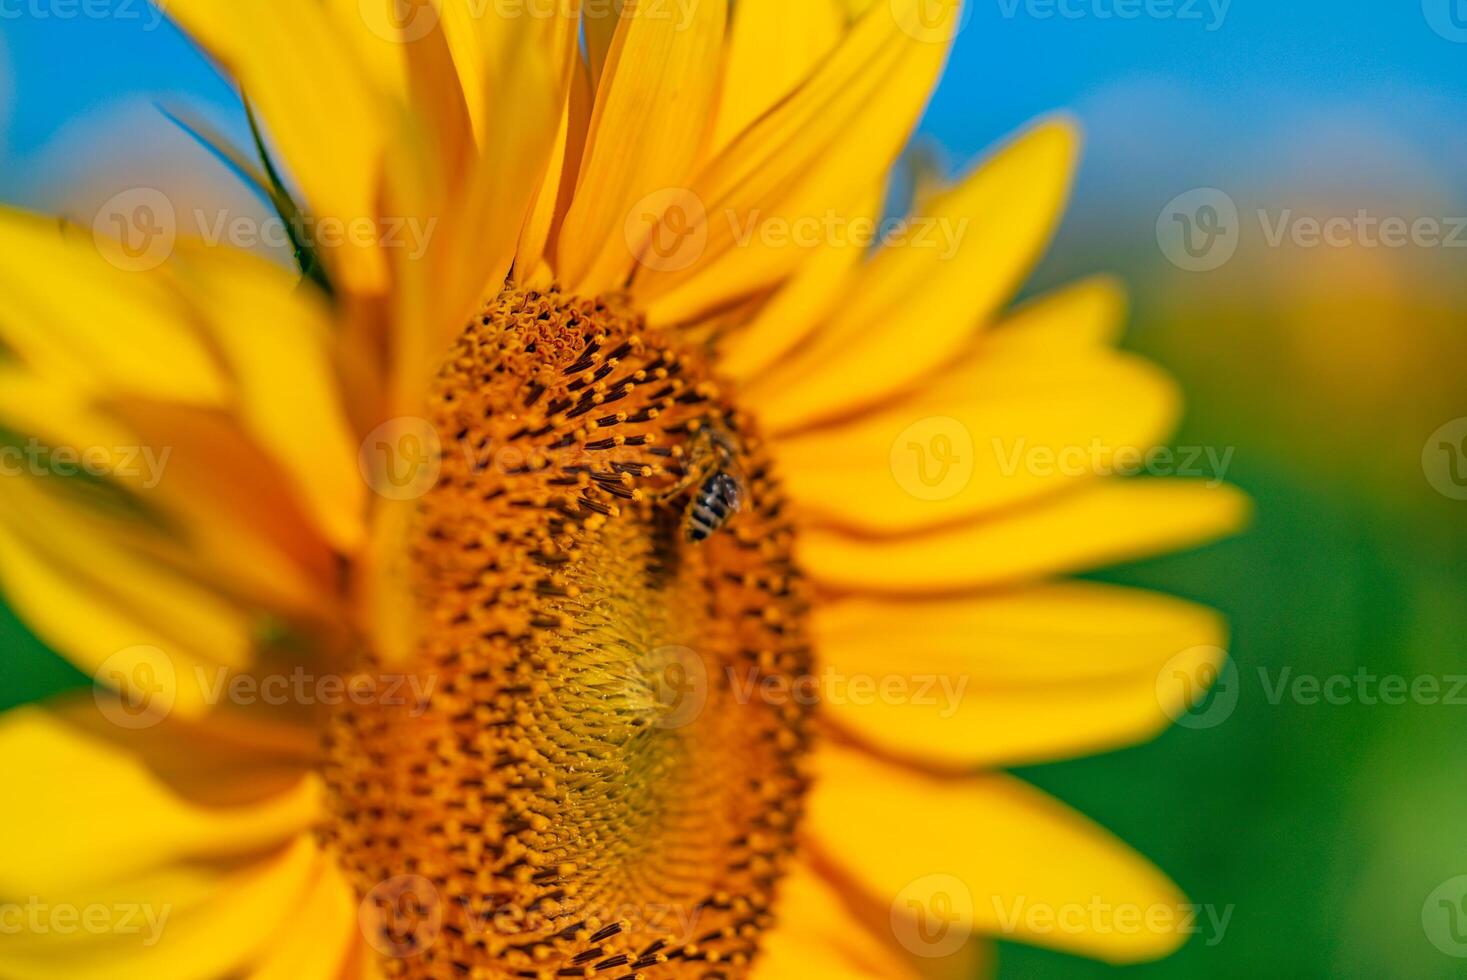 bee pollinates a sunflower flower in the summer in the field. Close-up photo